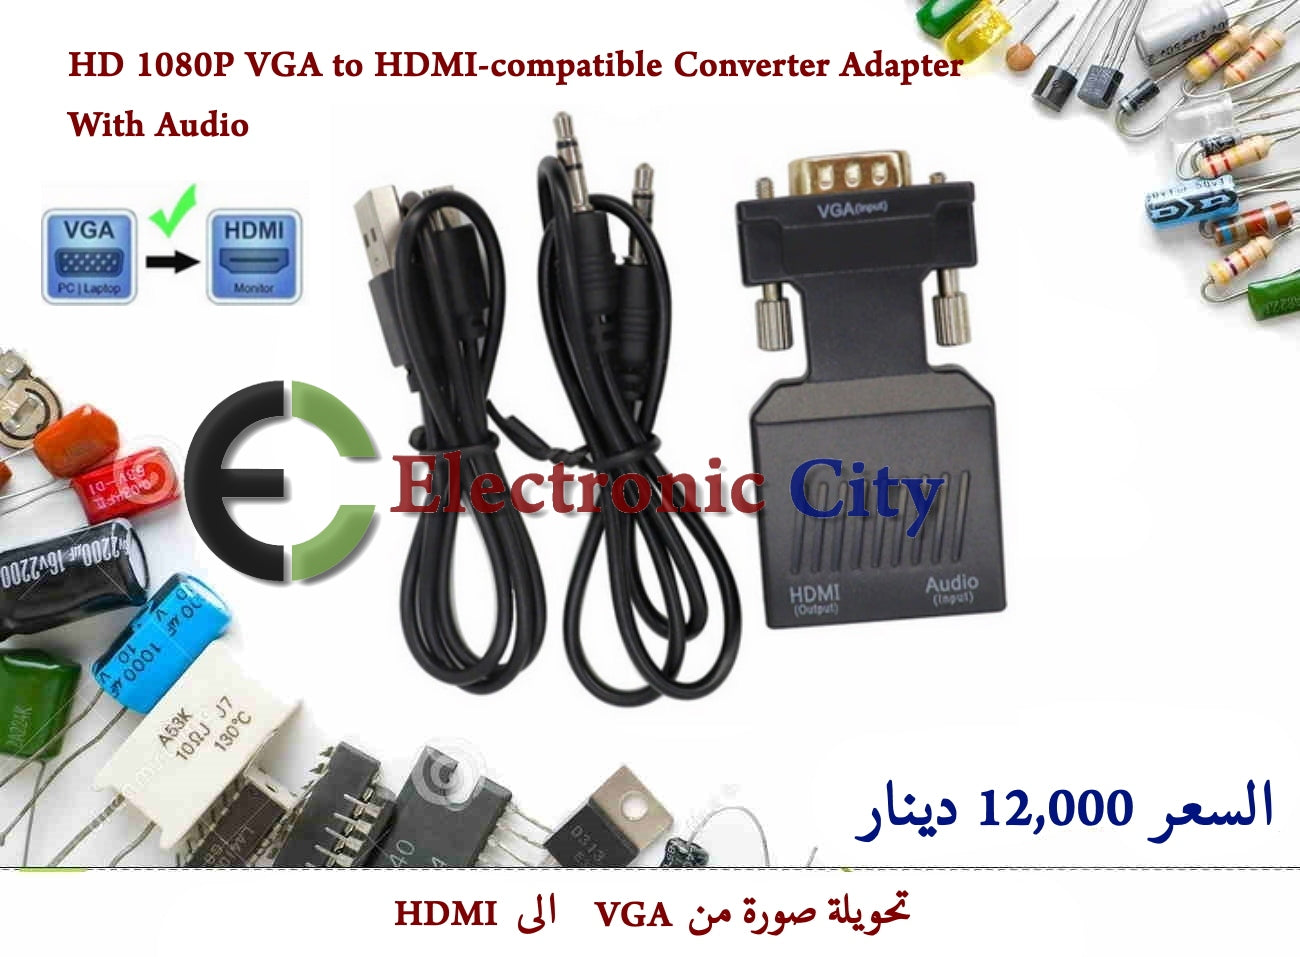 HD 1080P VGA to HDMI-compatible Converter Adapter With Audio